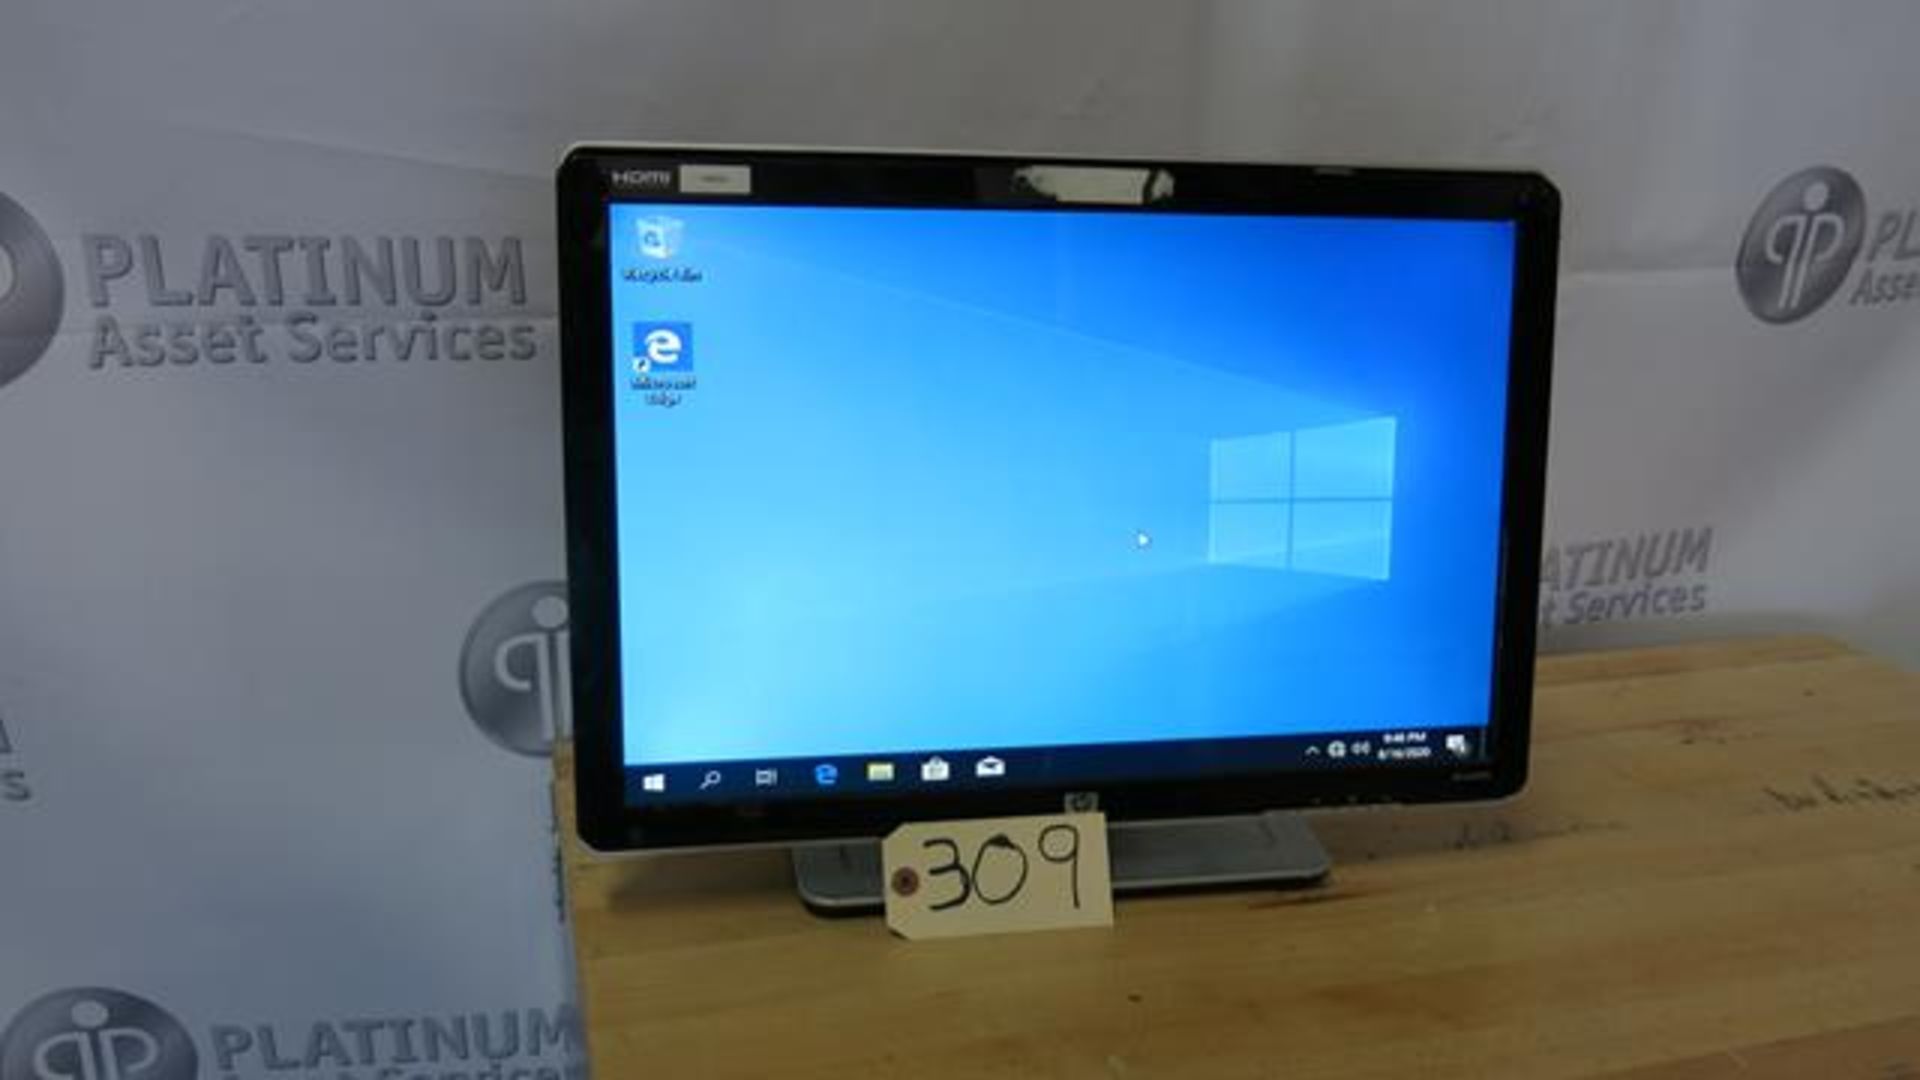 HP, W2207H, HSTND-2271-B, 22", LCD FLAT PANEL, WIDESCREEN COMPUTER MONITOR 2008 (TAG#309)